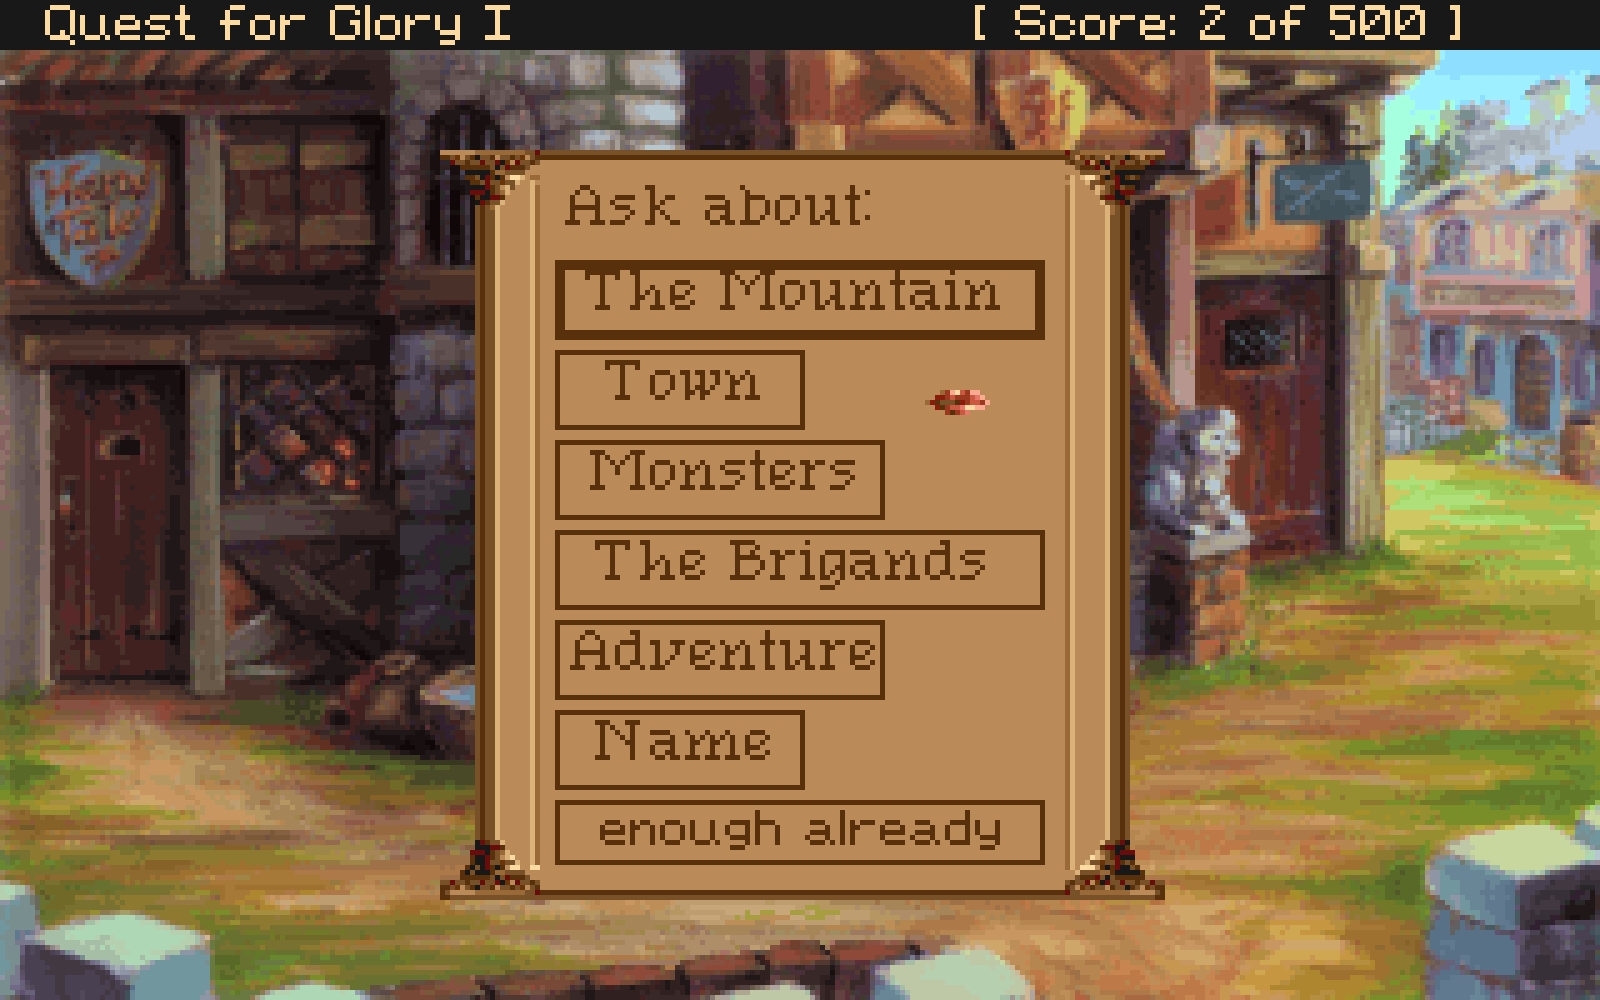 First glory. For the Glory игра. Glory to the Heroes игра. Quest for Glory i so you want to be a Hero. Quests for Glory.